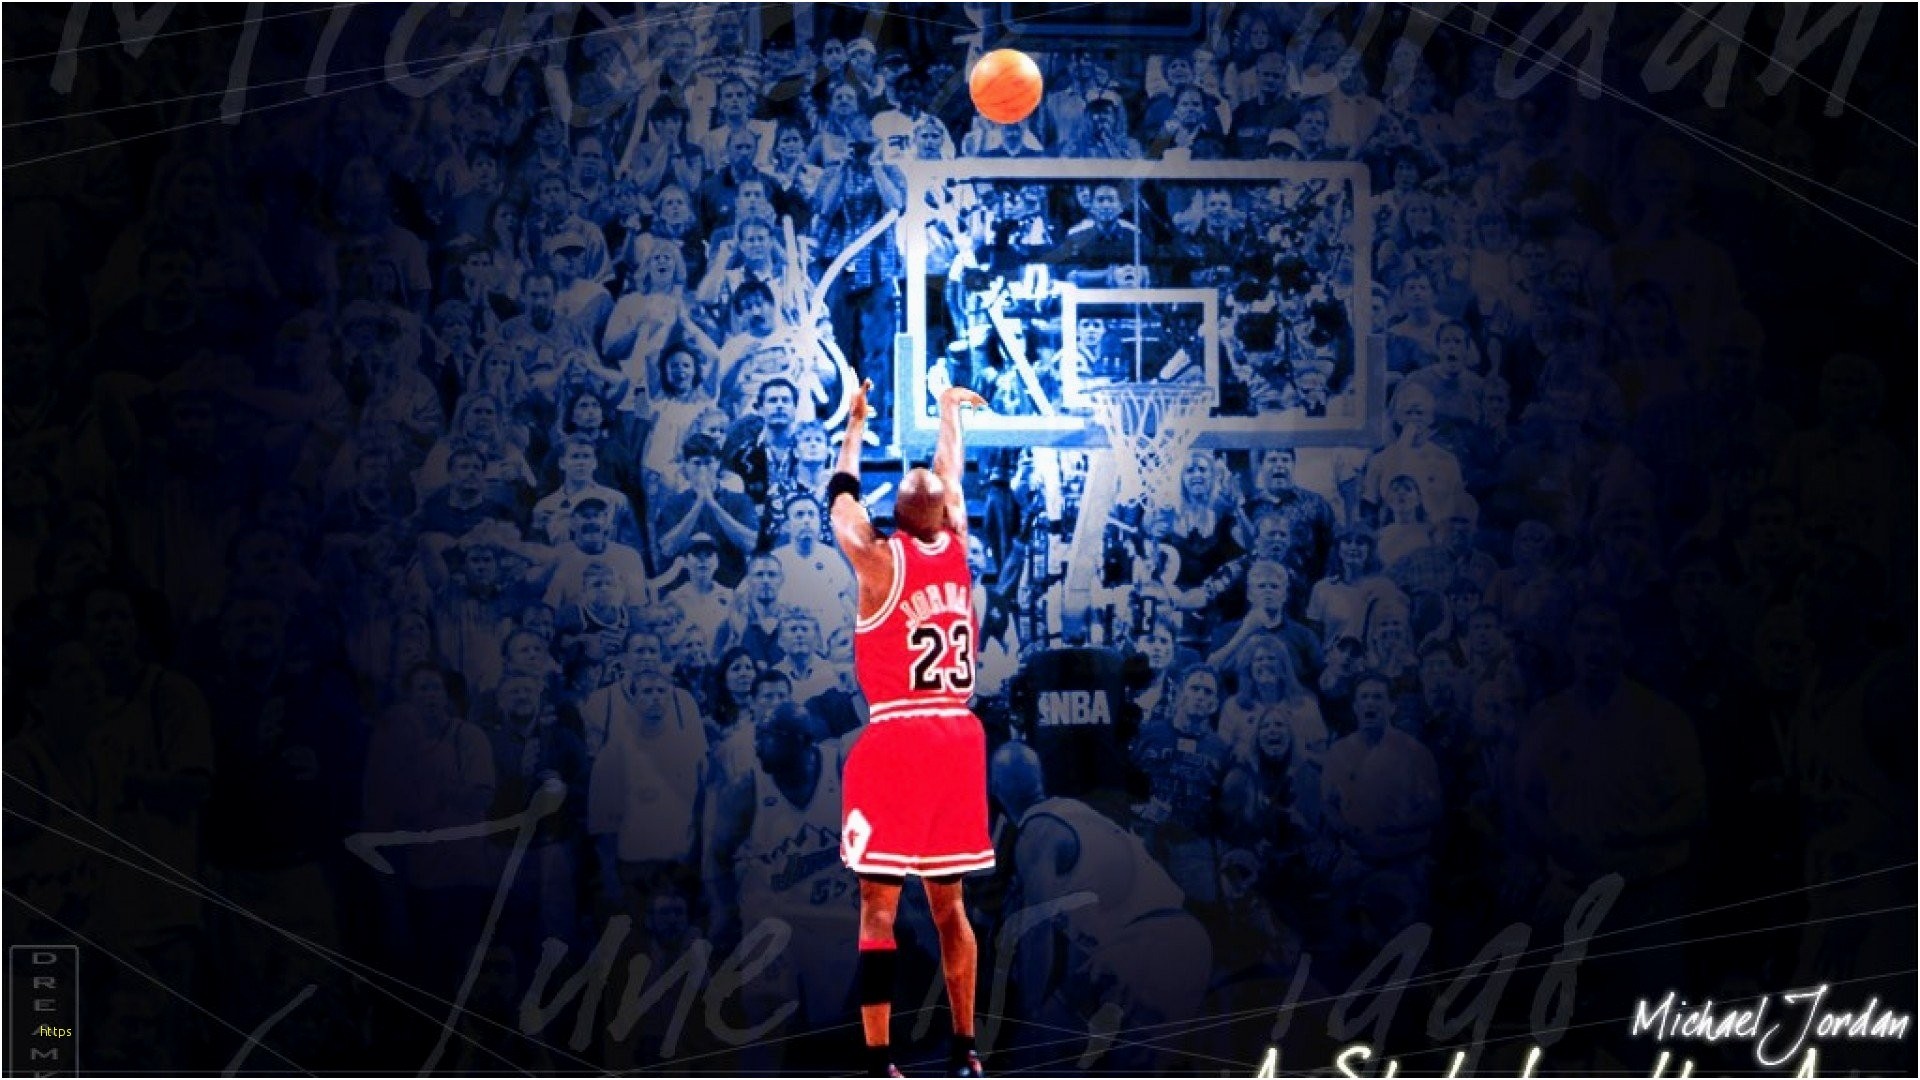 1920x1080 ... Hd Basketball Wallpapers Luxury Awesome Basketball Wallpapers Hd  Elegant Chicago Bulls Wallpaper Hd ...